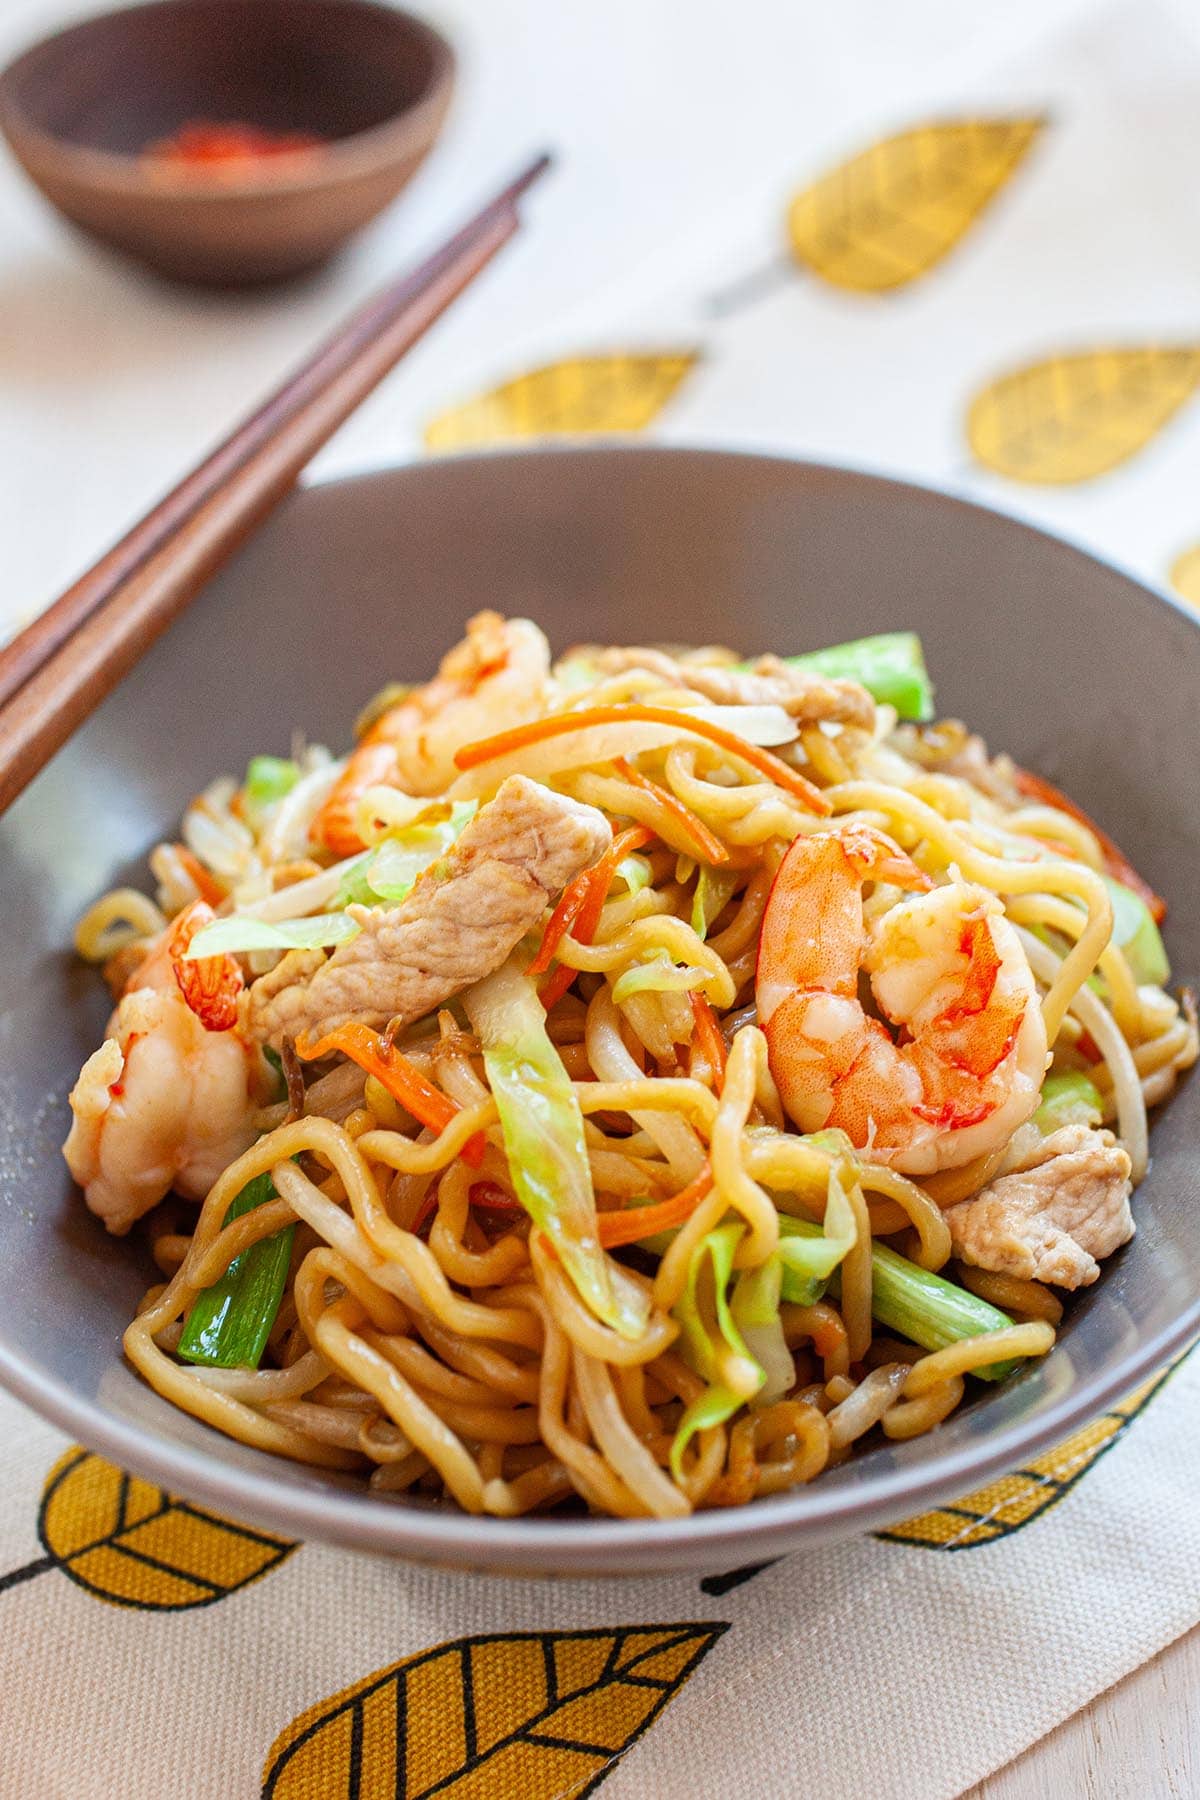 Chow Mein noodles with shrimp, chicken and vegetables.